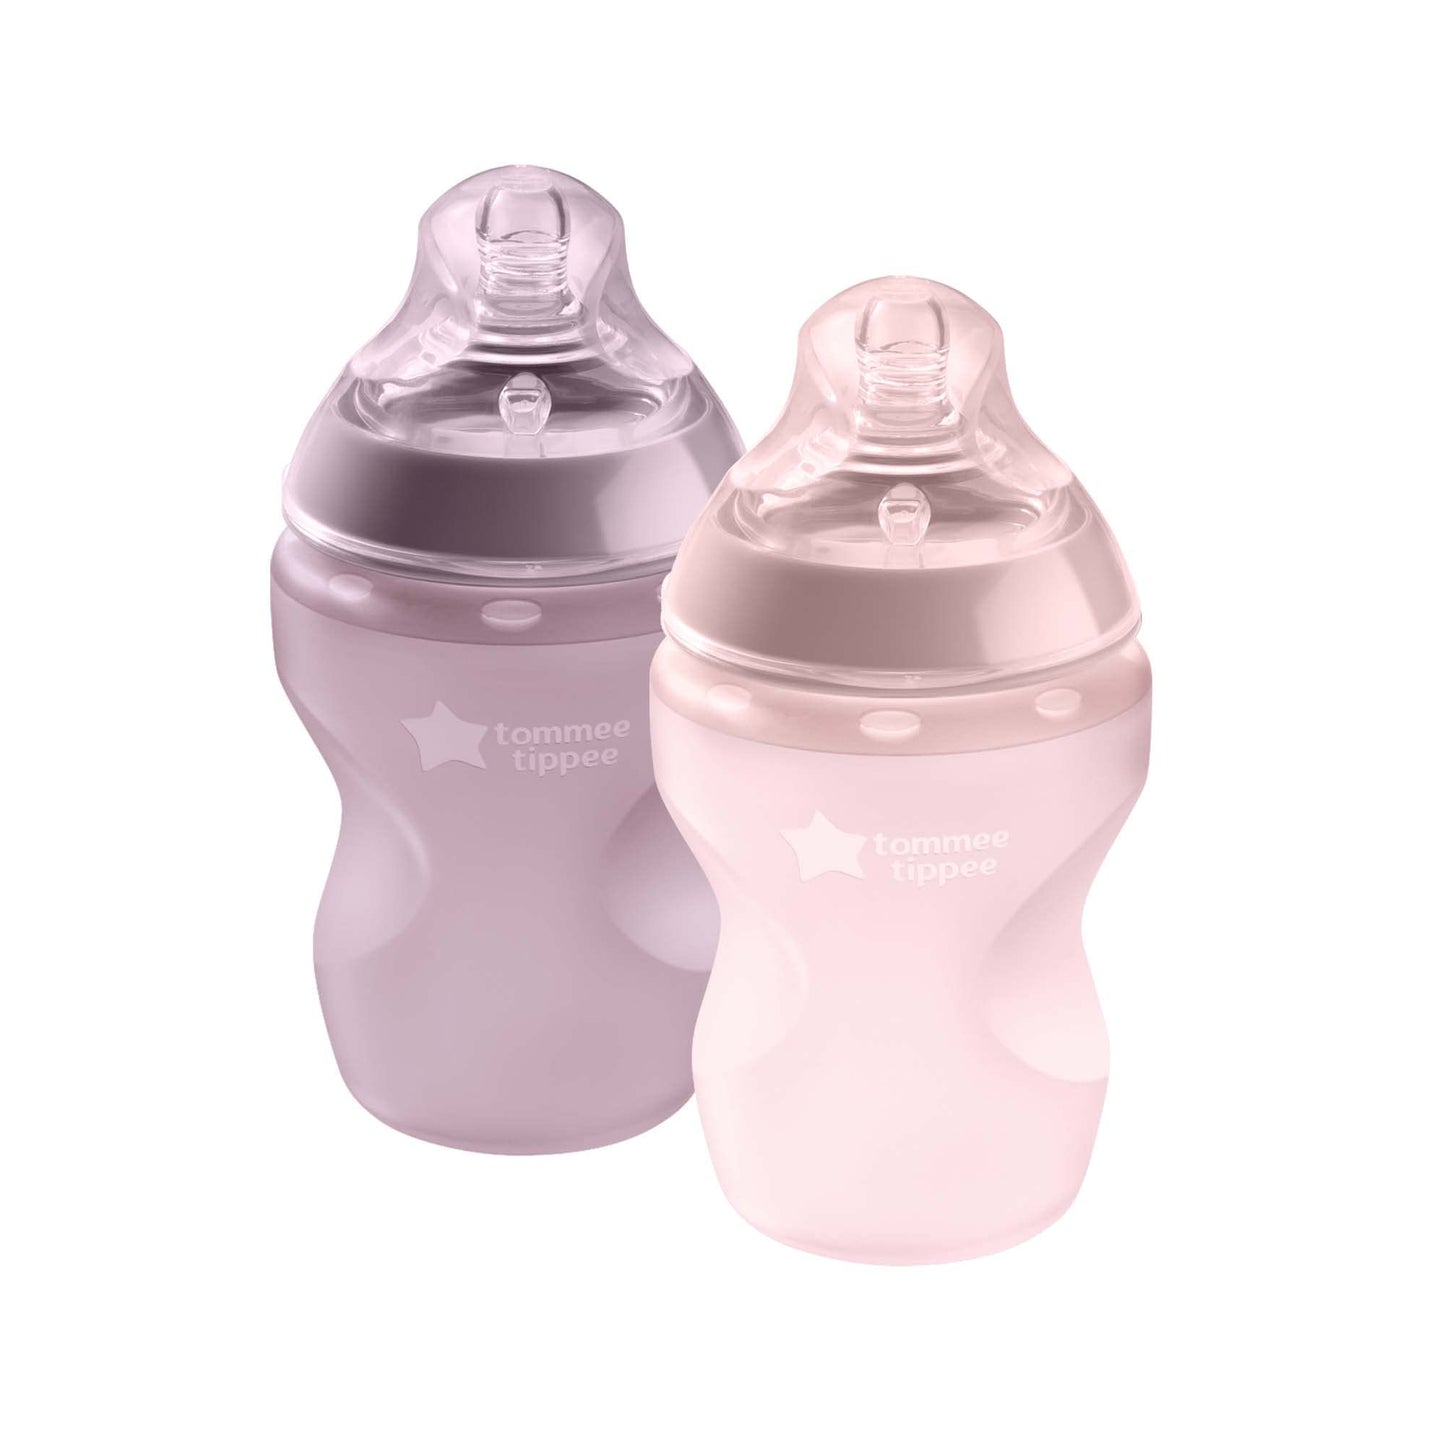 Tommee Tippee Closer to Nature Soft Feel Silicone Baby Bottle, Slow Flow Breast-Like, Anti Colic, Stain and Odor Resistant (9oz, 2 Count, Pink)